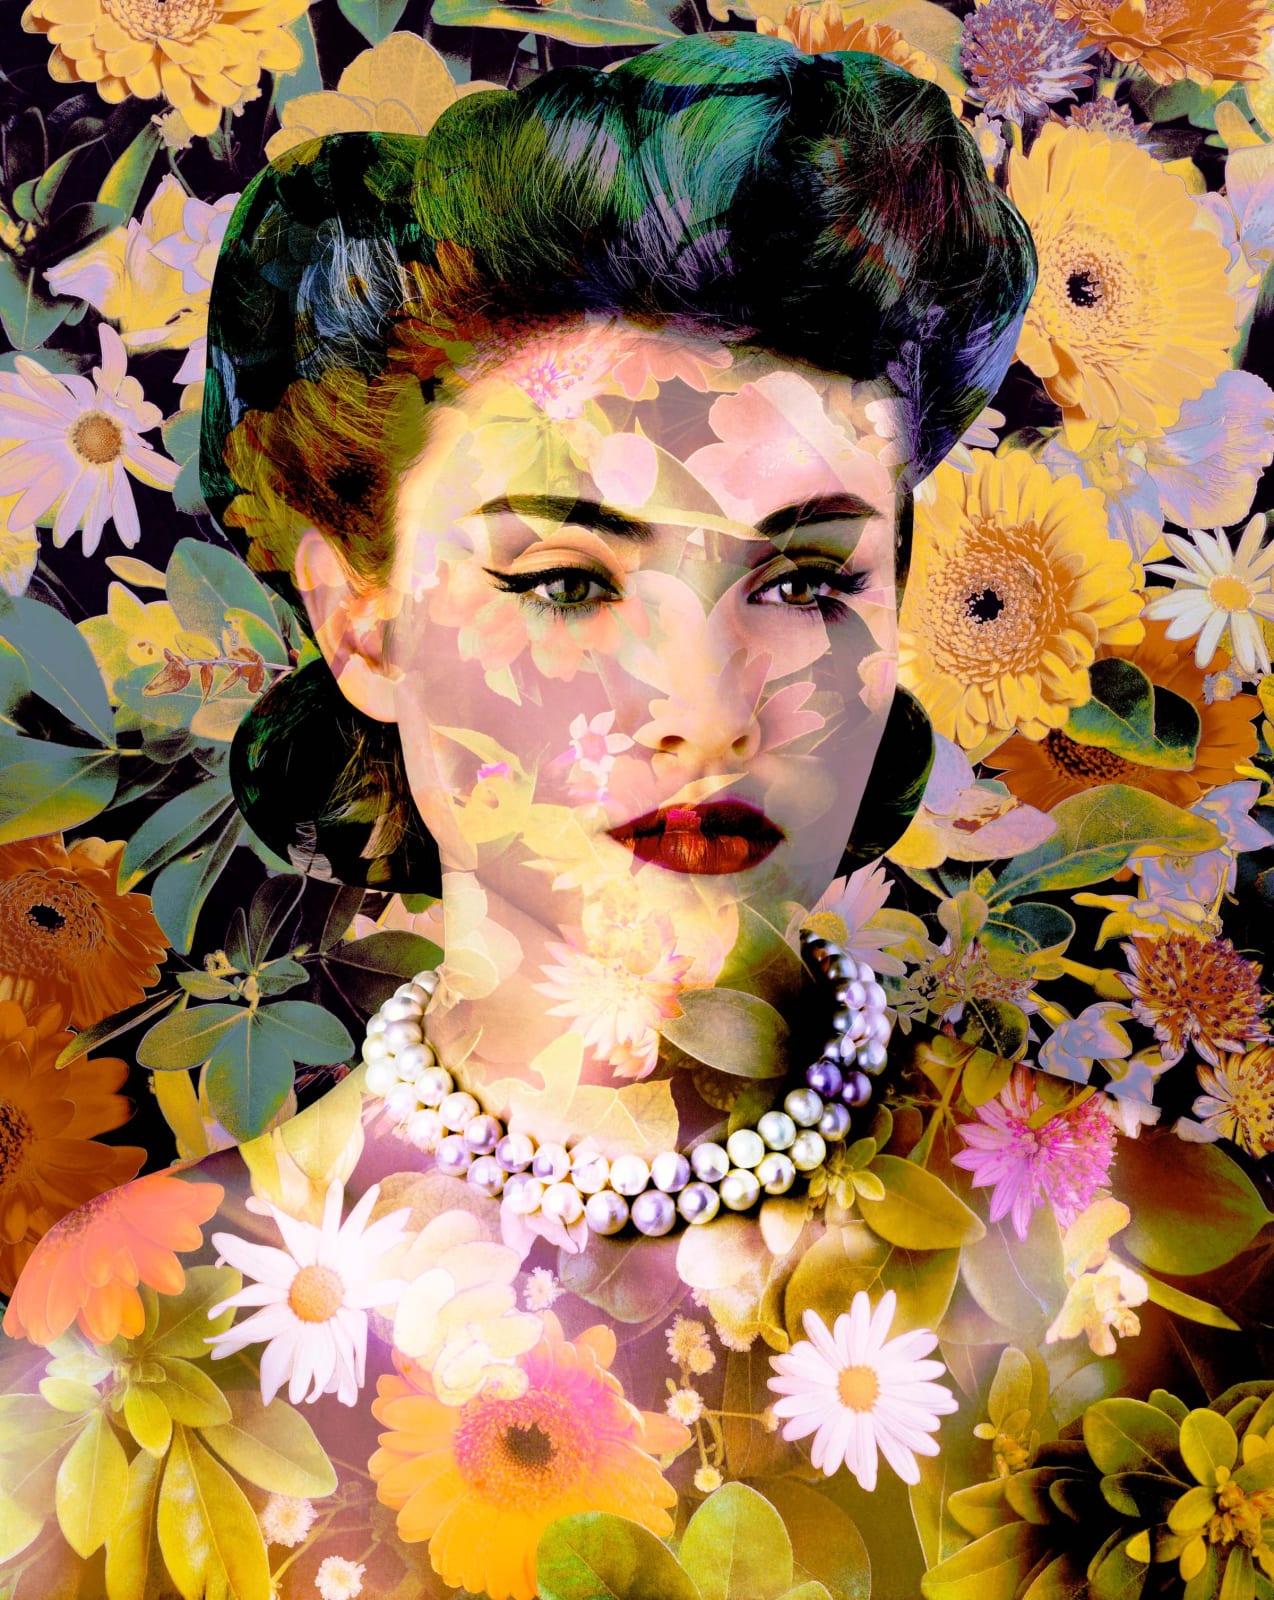 Woman with pearl necklace and namaqua marigold flowers overlaid over portrait, from Black Eyed Susan series, by Valérie Belin